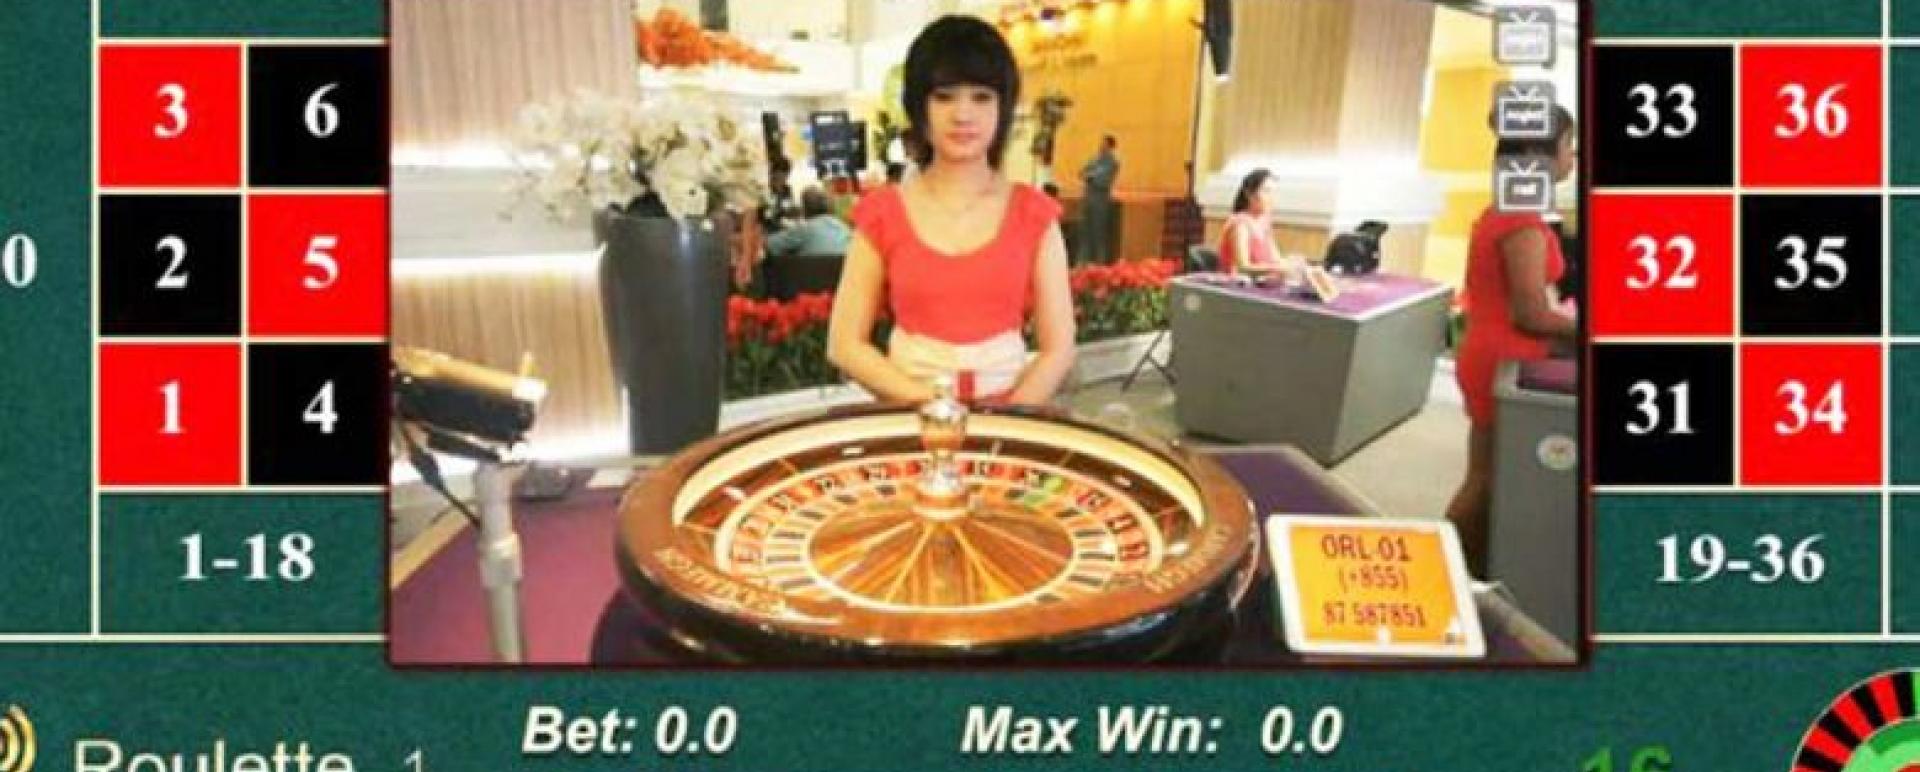 Under the new law, Cambodian citizens are still banned from entering casinos to gamble. Photo supplied